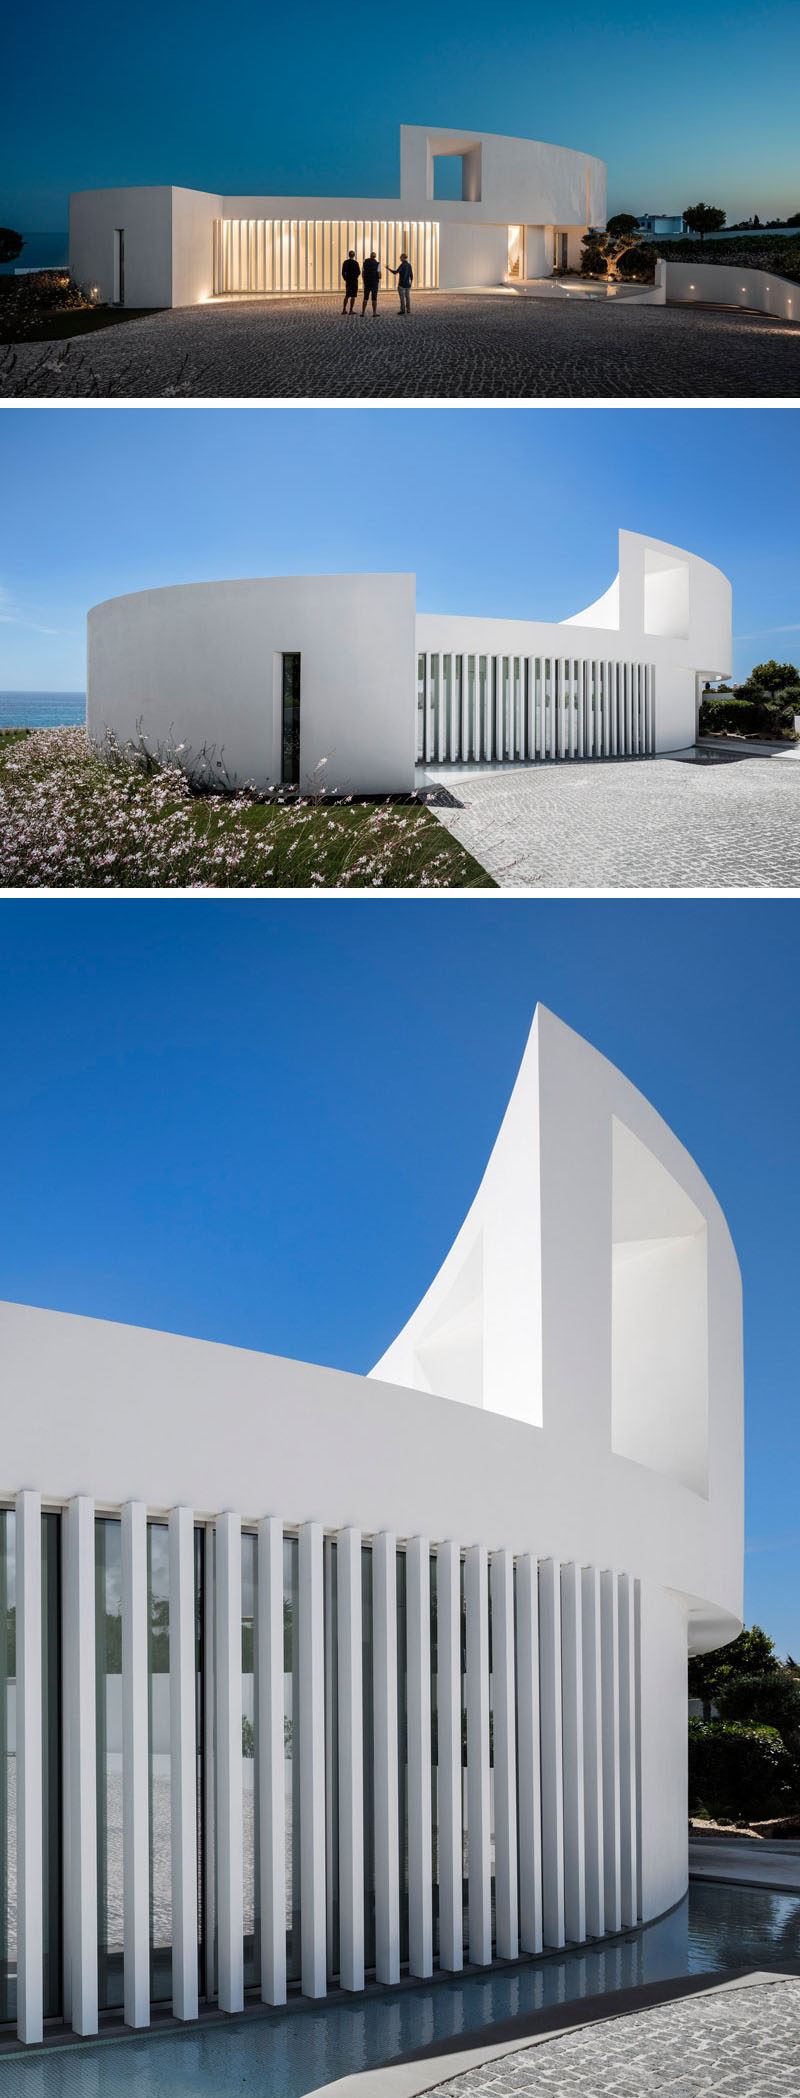 Mario Martins Atelier have designed this modern and sculptural house in Luz, Portugal, that's based on the geometric shape of an ellipse.